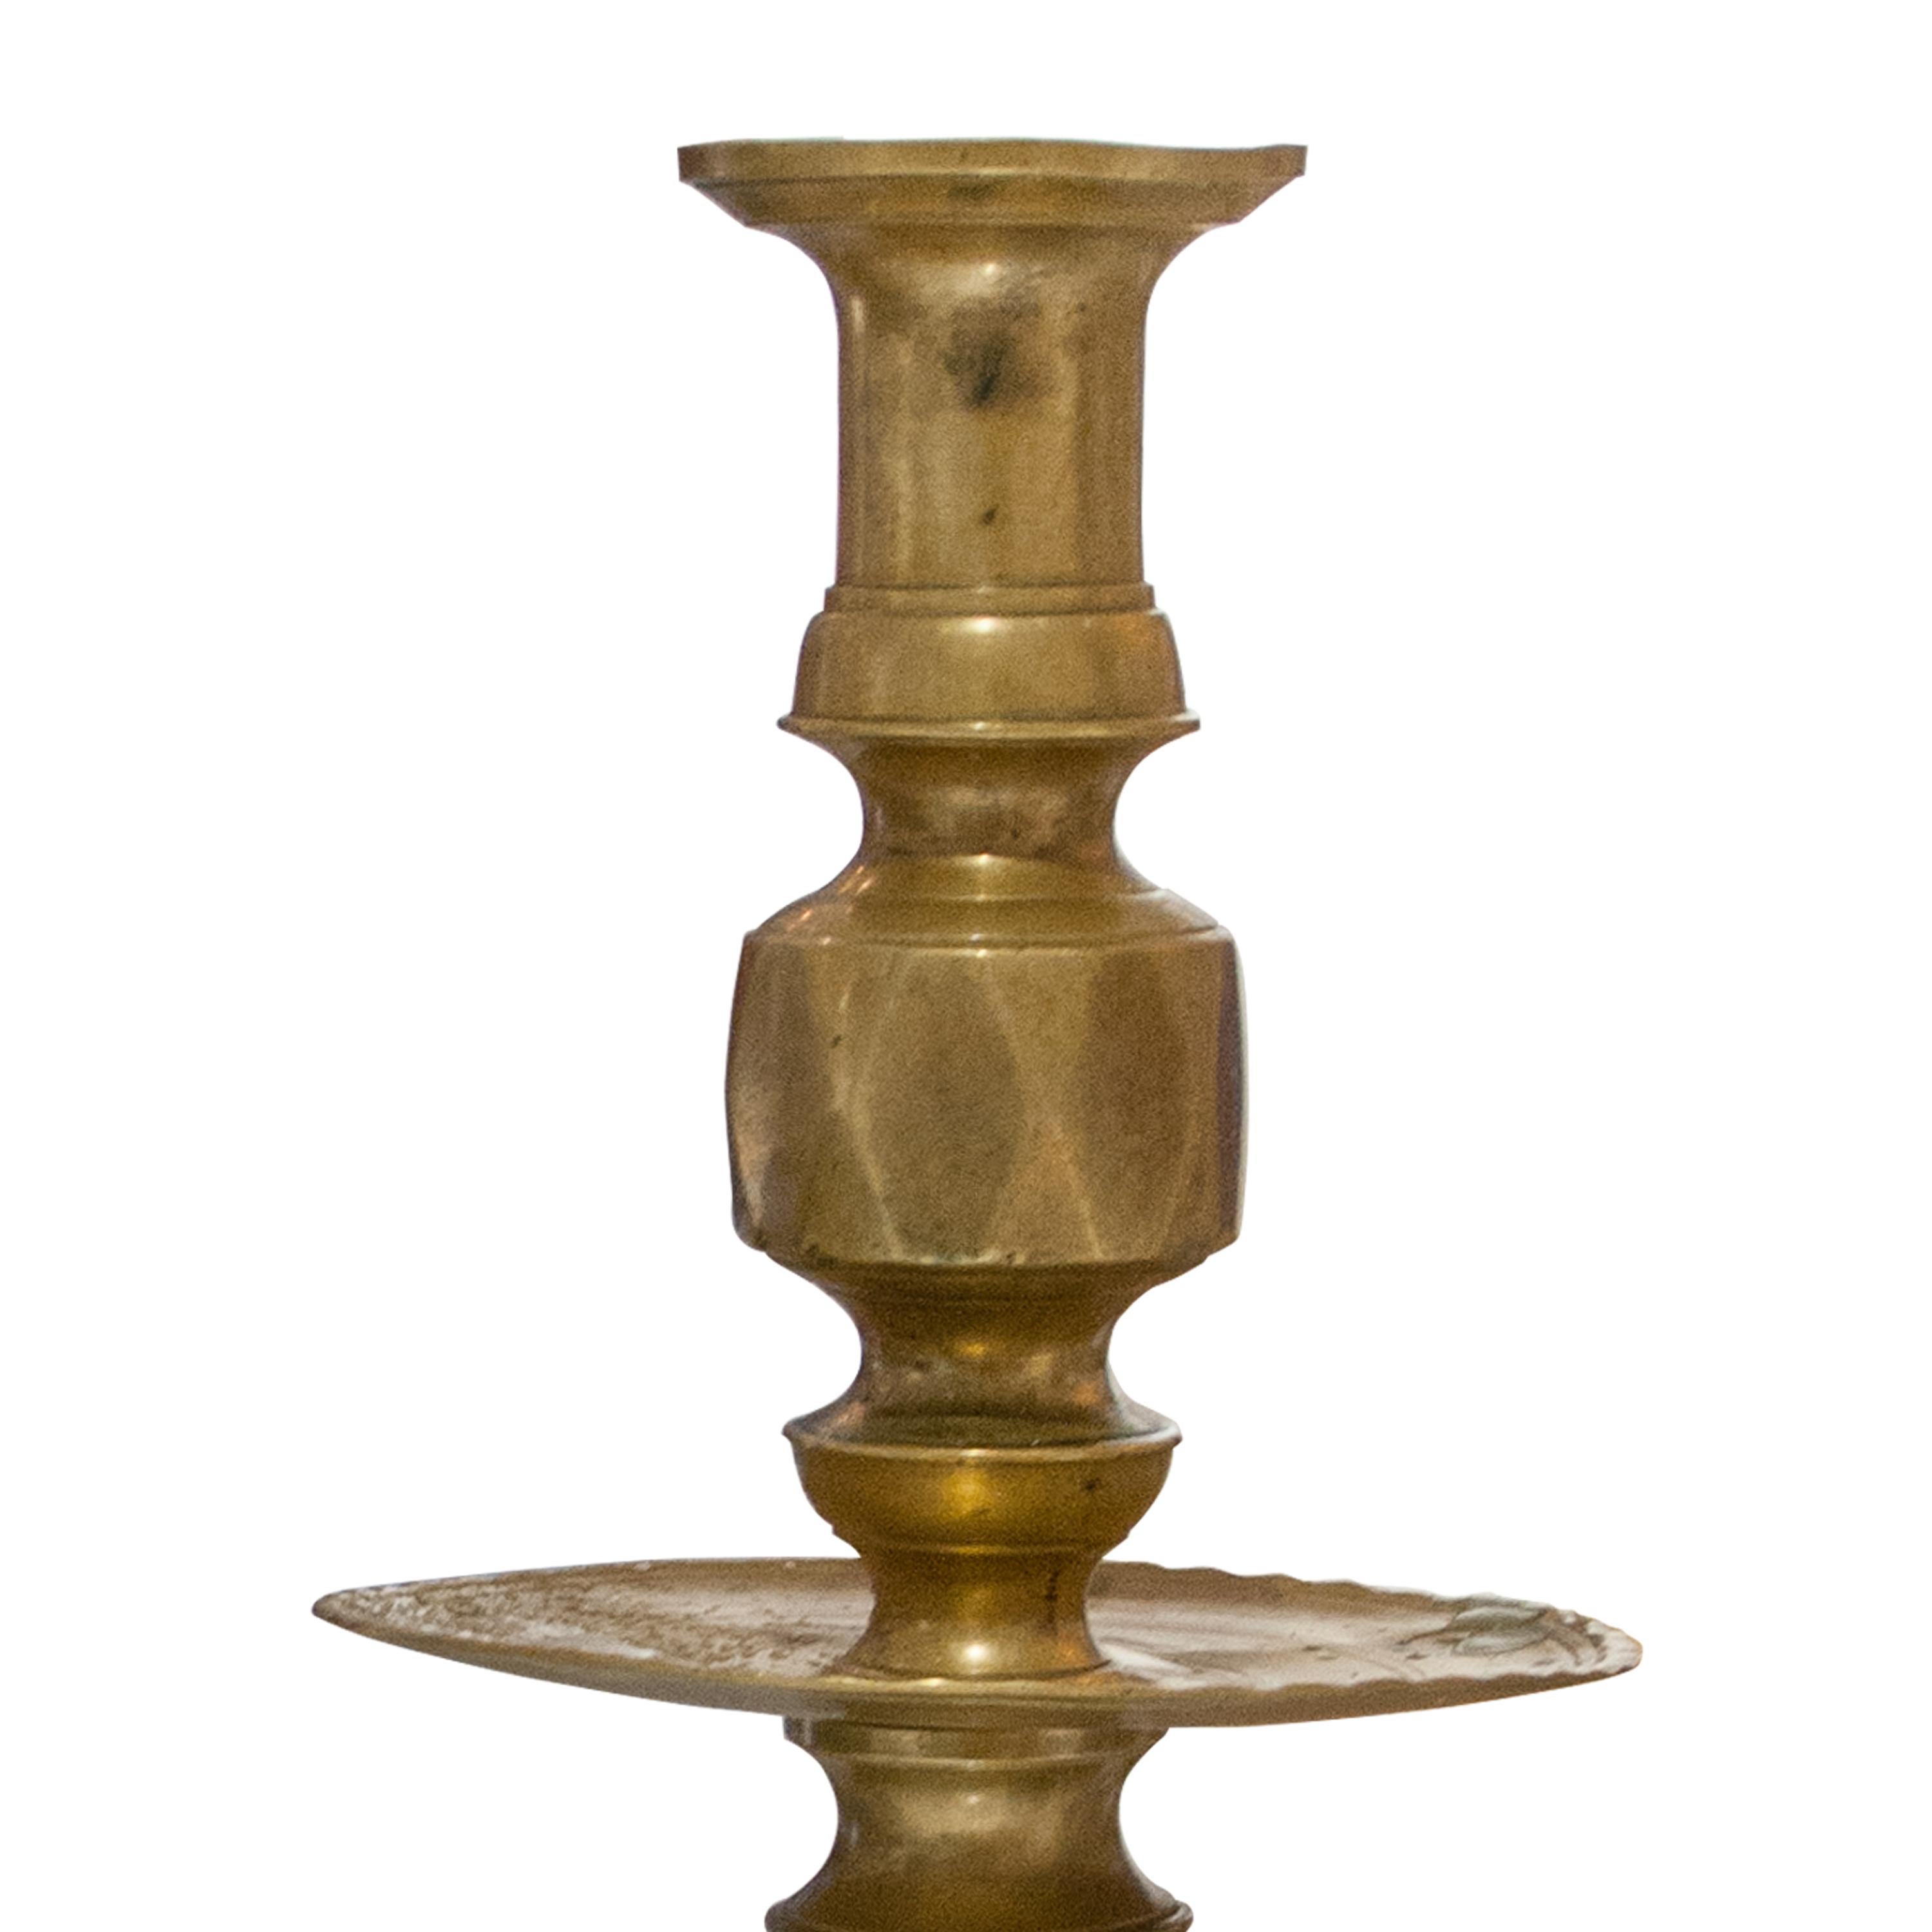 Pair of candle holders made of solid bronze.